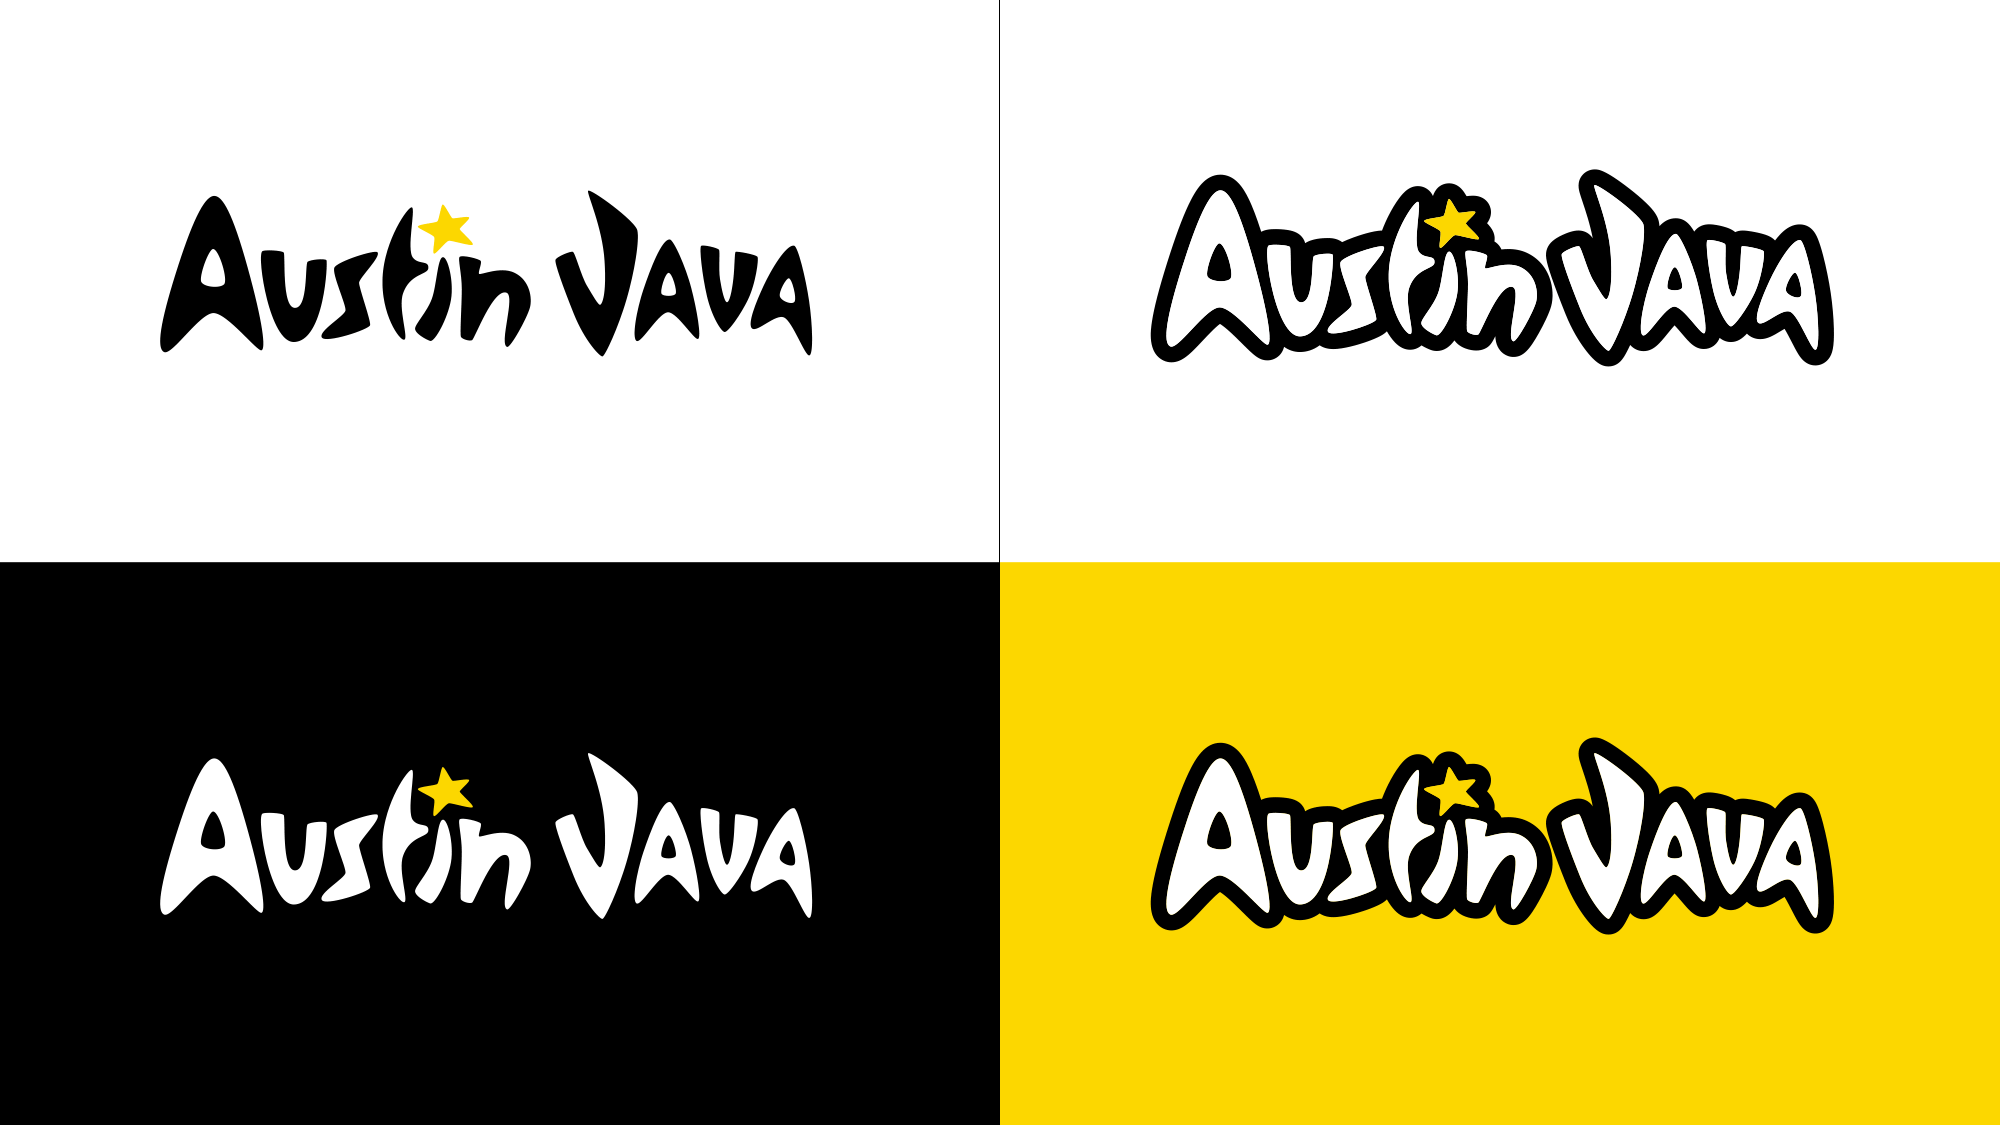 New Logo and Identity for Austin Java by Tilted Chair